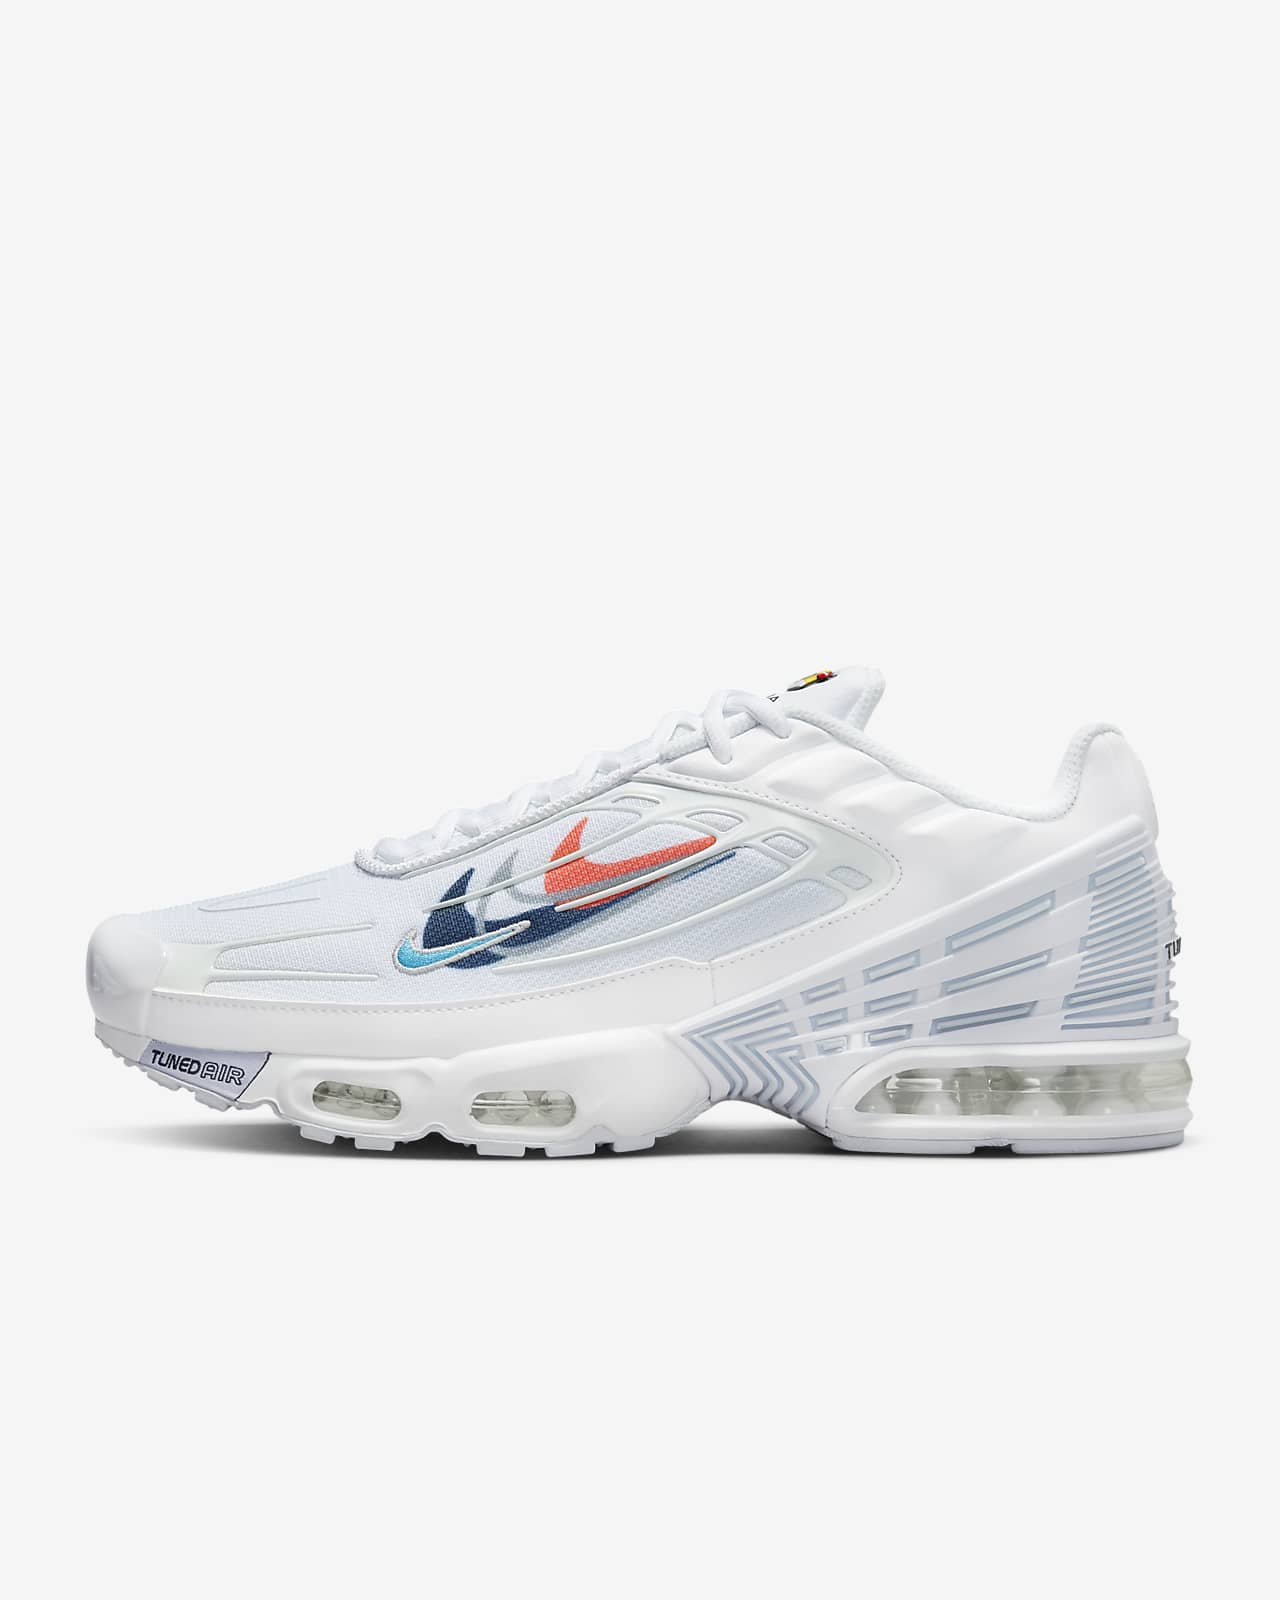 Chaussure Nike Max 3 pour Nike BE